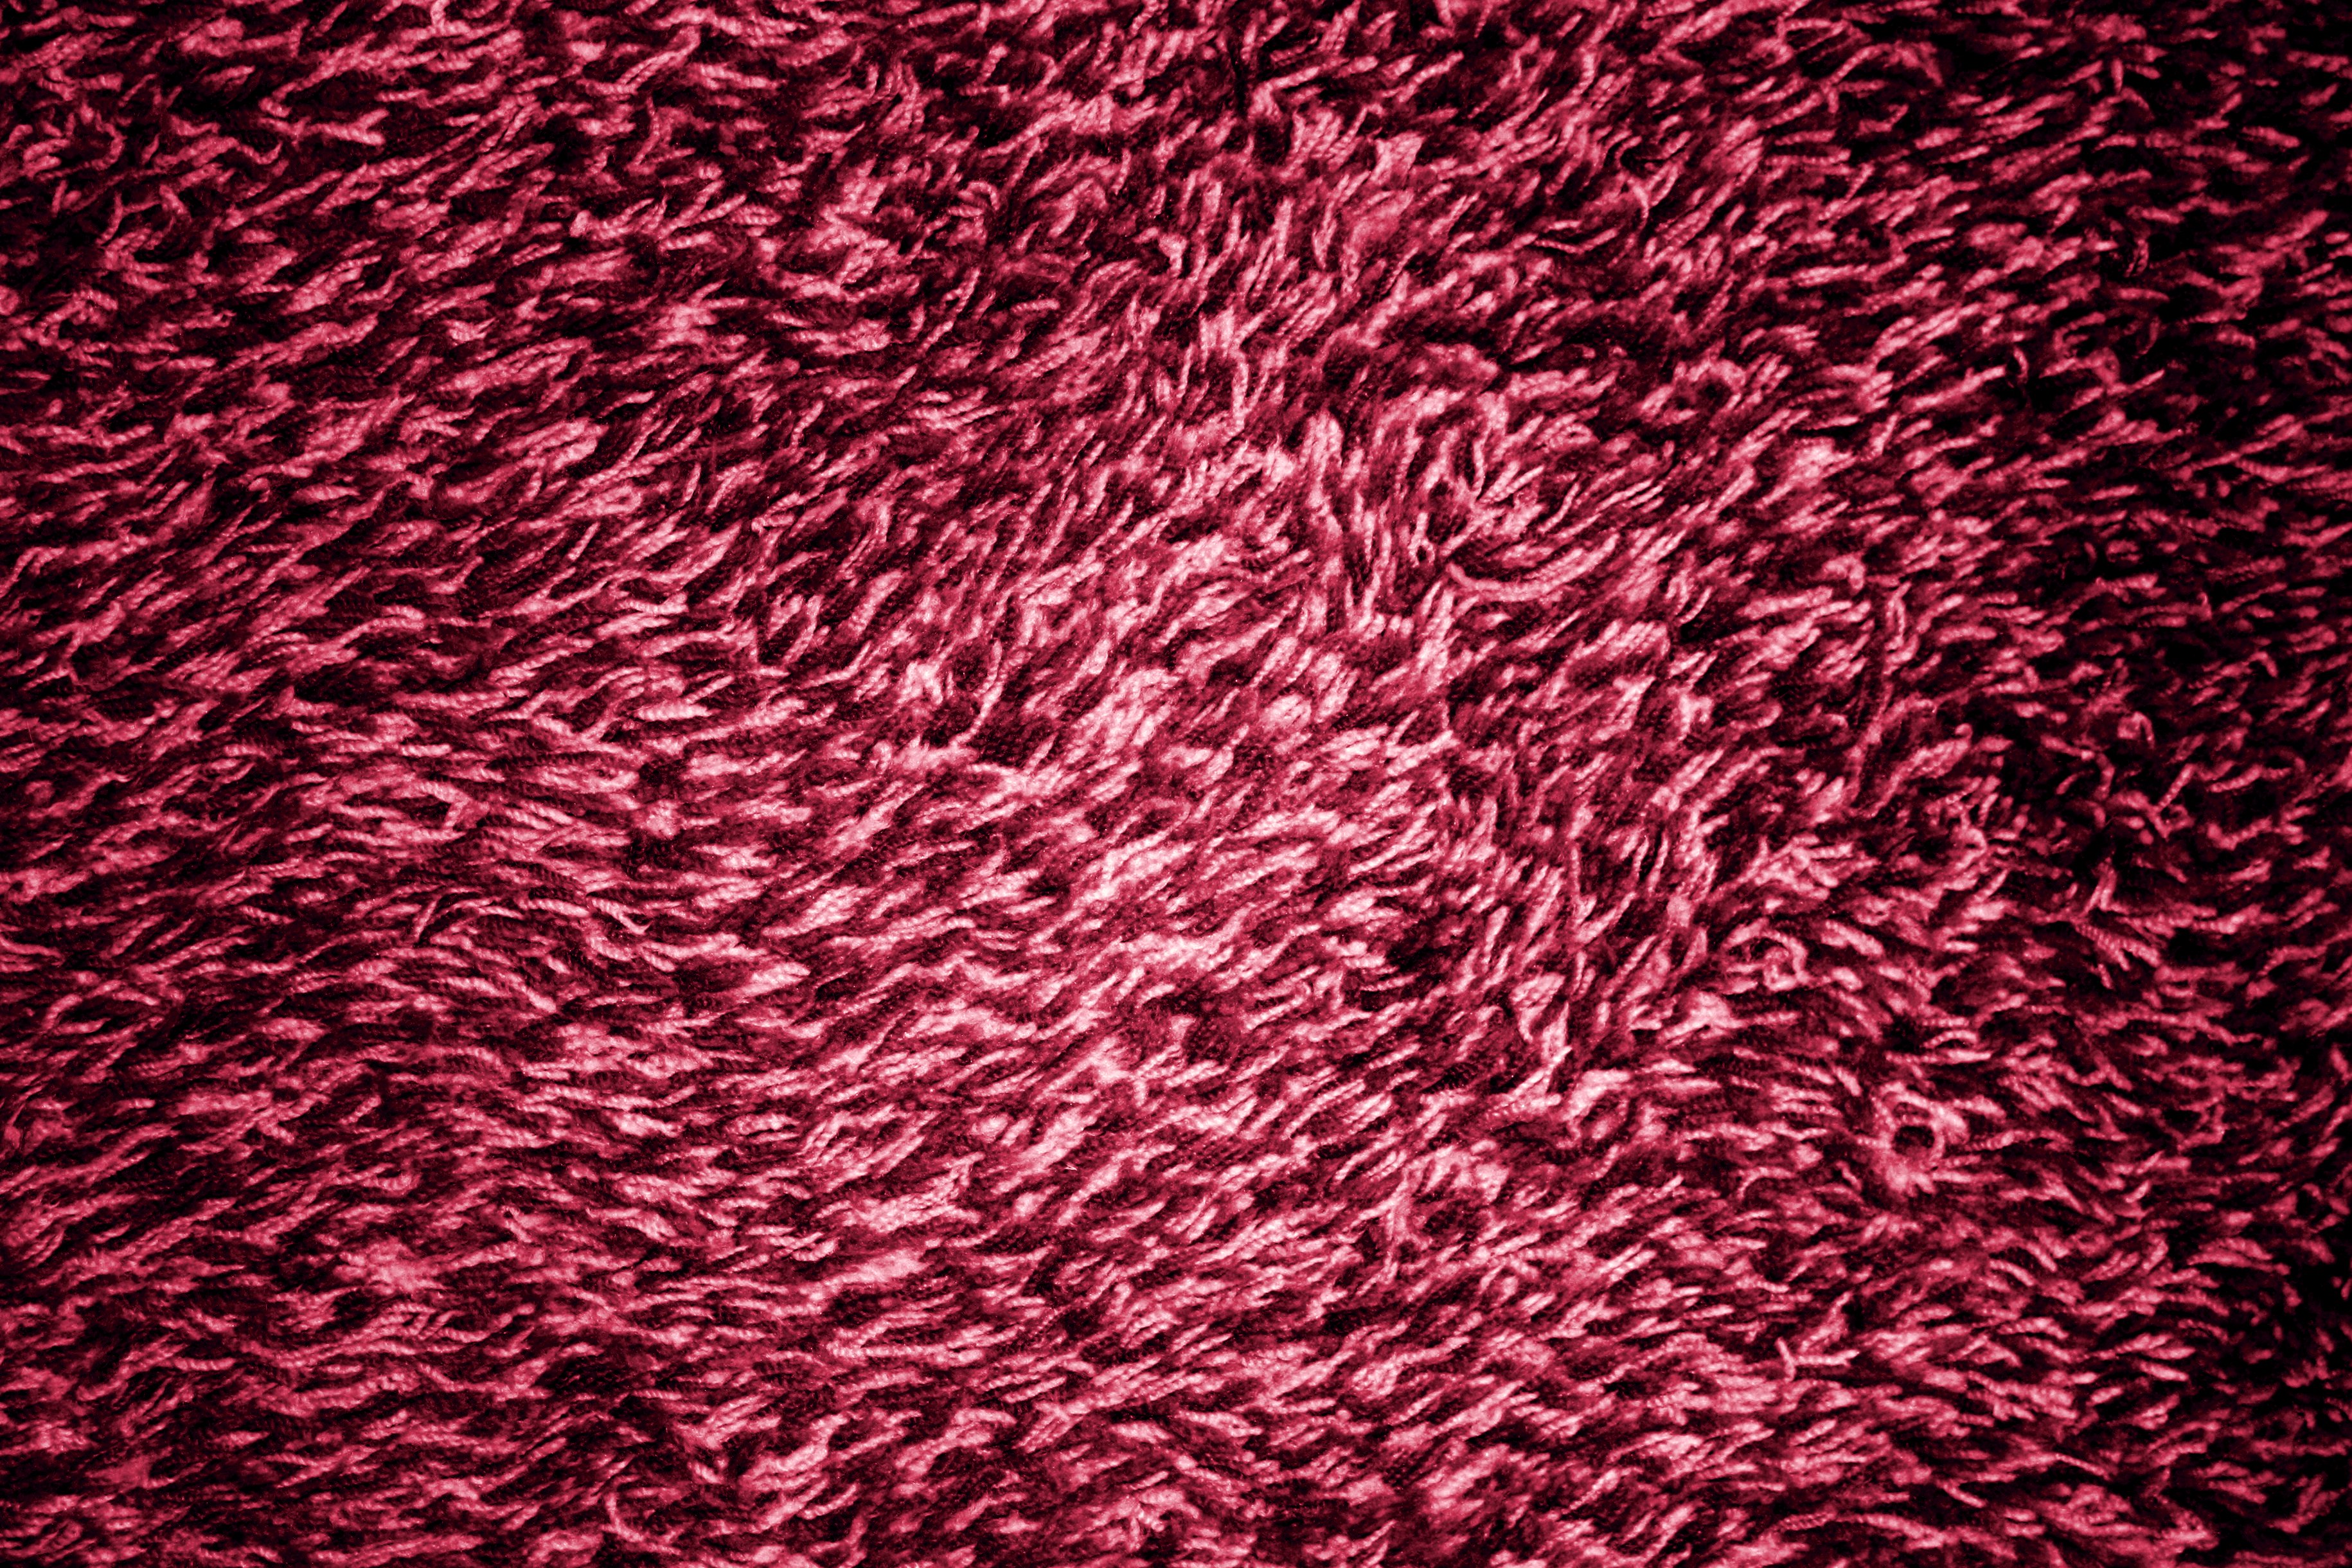 Magenta Or Hot Pink Shag Carpeting Texture Picture